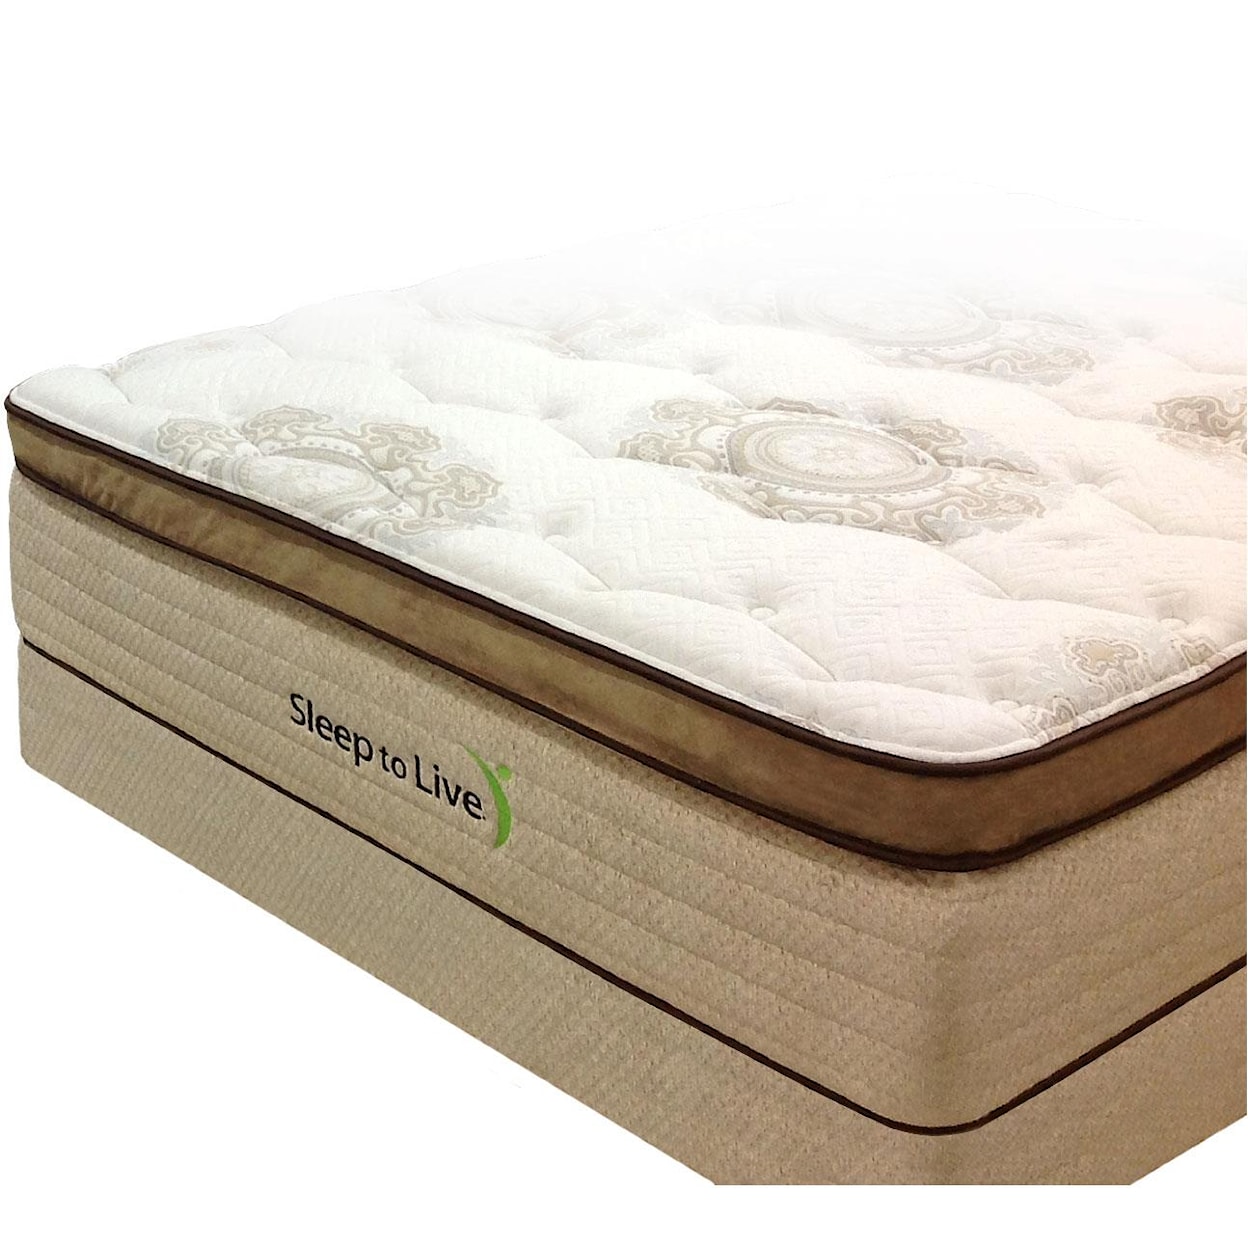 Kingsdown Body System 3 Queen Pocketed Coil Mattress